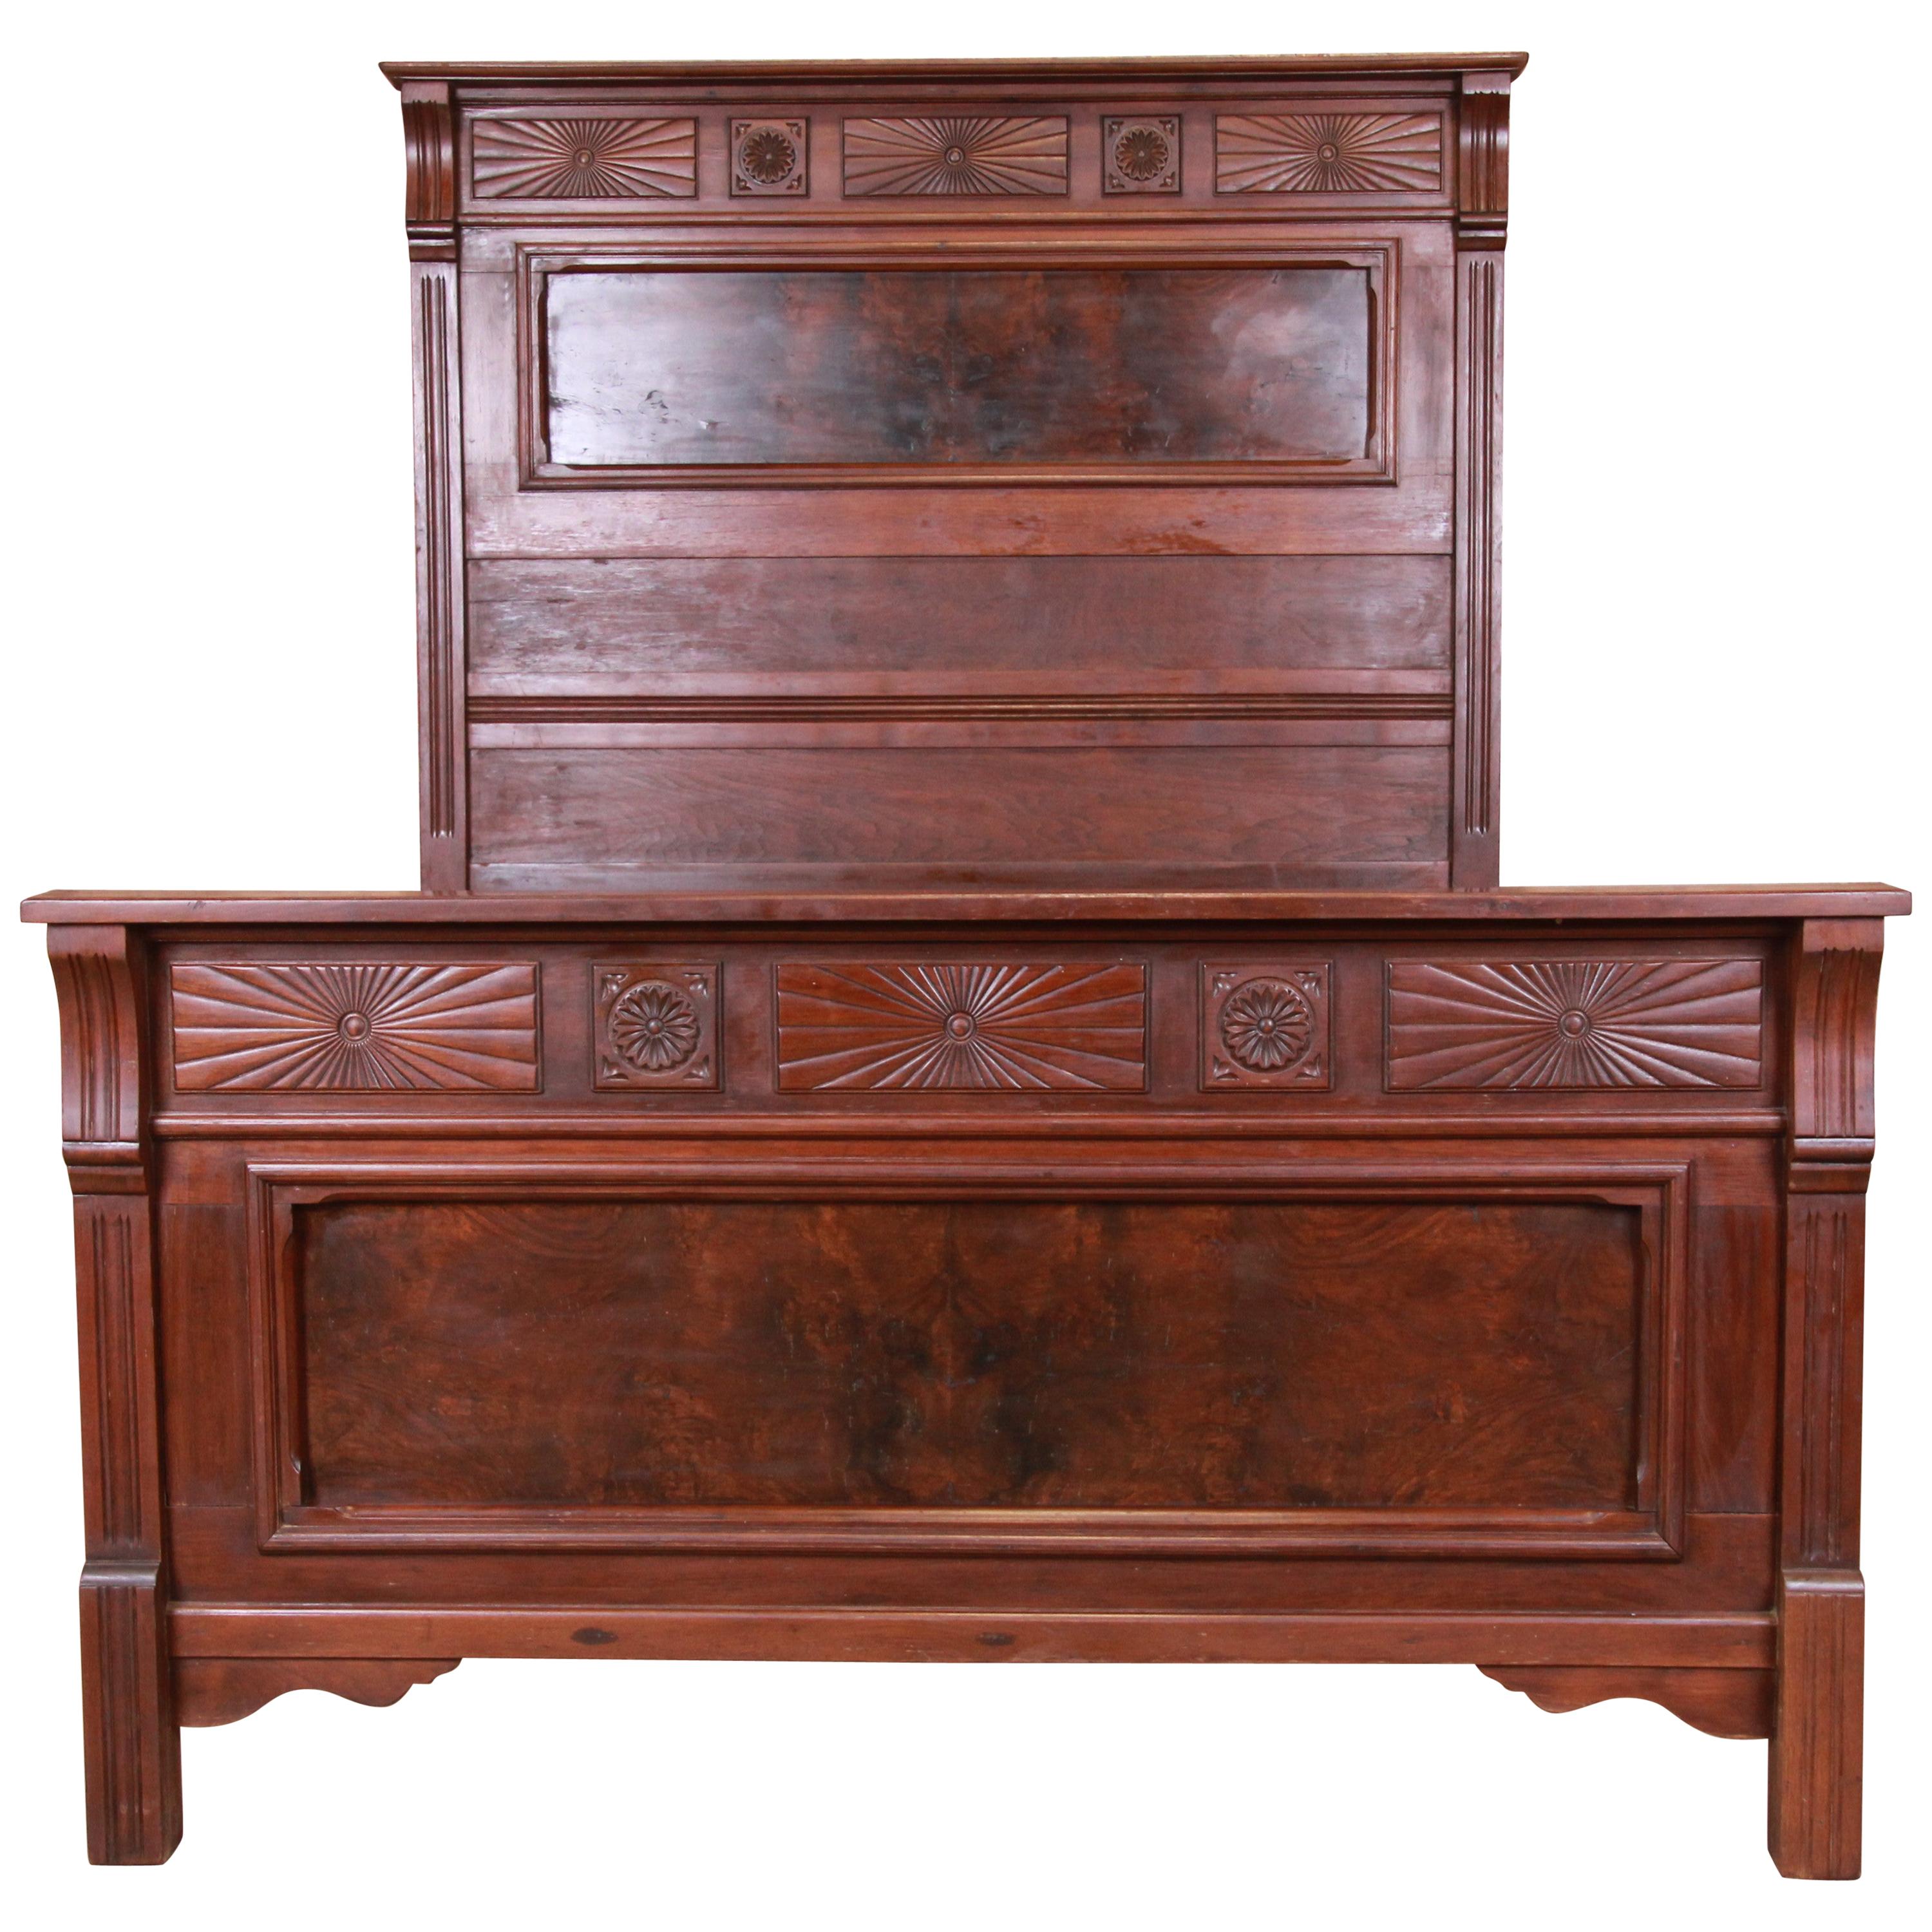 Antique Eastlake Victorian Burled Walnut Full Size Bed, circa 1880s